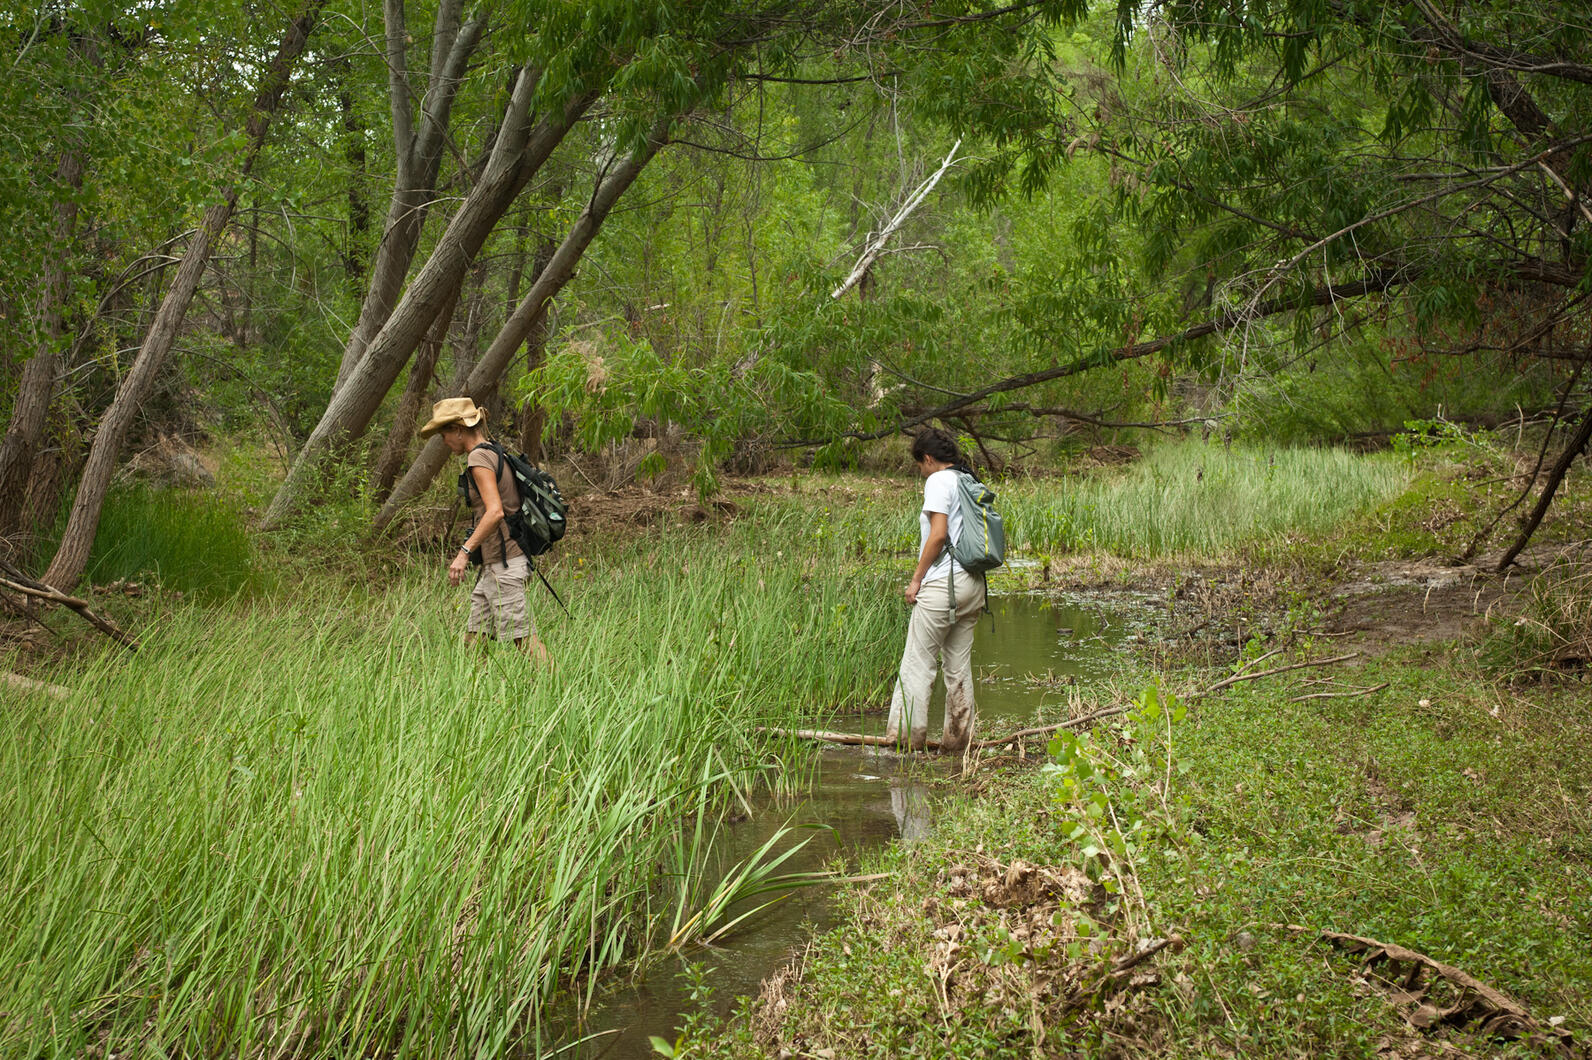 Audubon staff and interns survey for birds in cottonwoods and willows along the Agua Fria River.